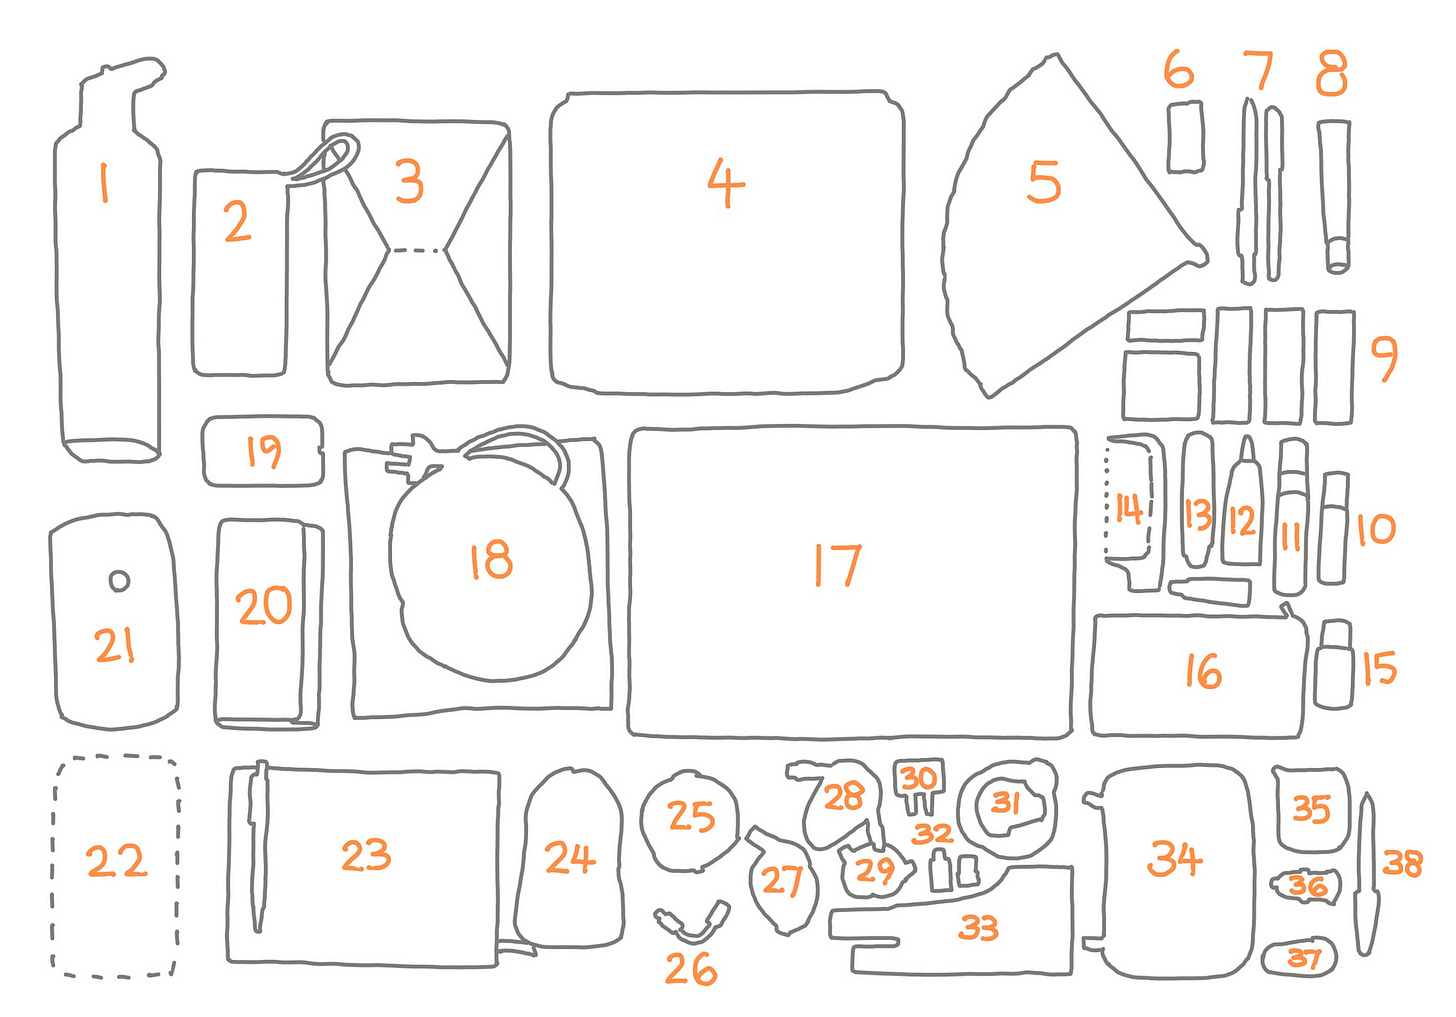 Grey outline with orange numbers, showing the position of each item in the above photo. See full list below.